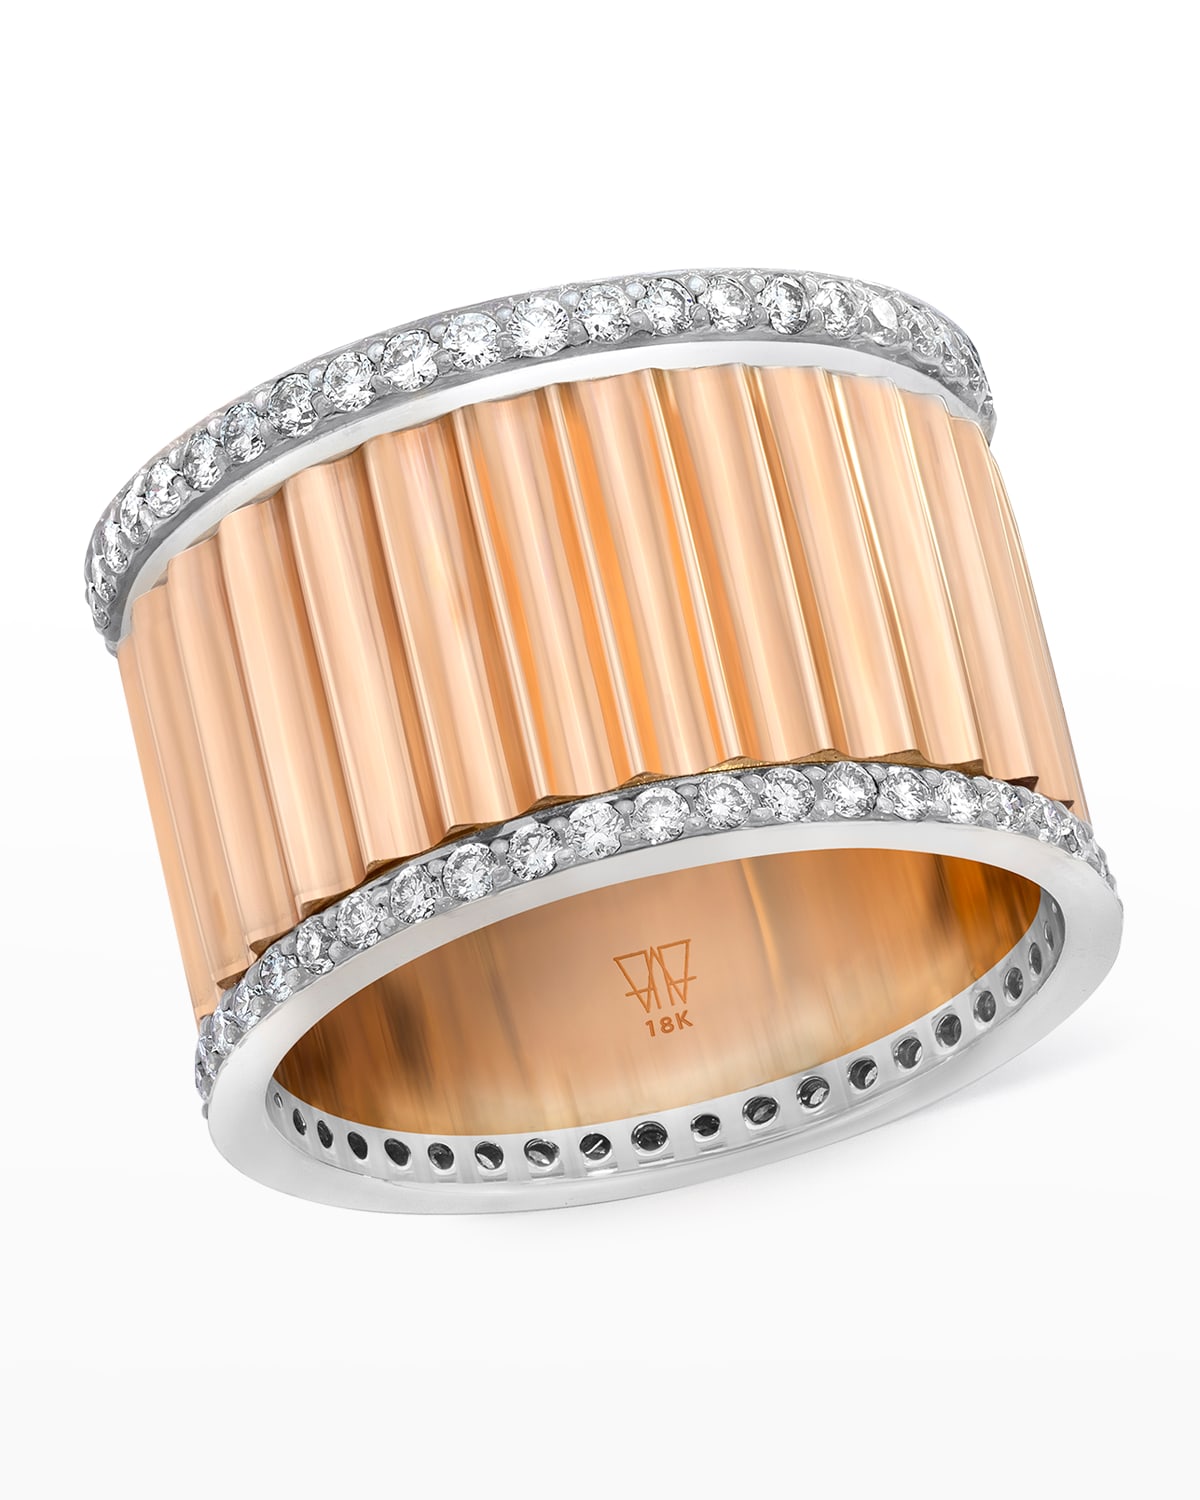 Walters Faith Clive Rose Gold Wide Fluted Band Ring With White Gold And Diamonds